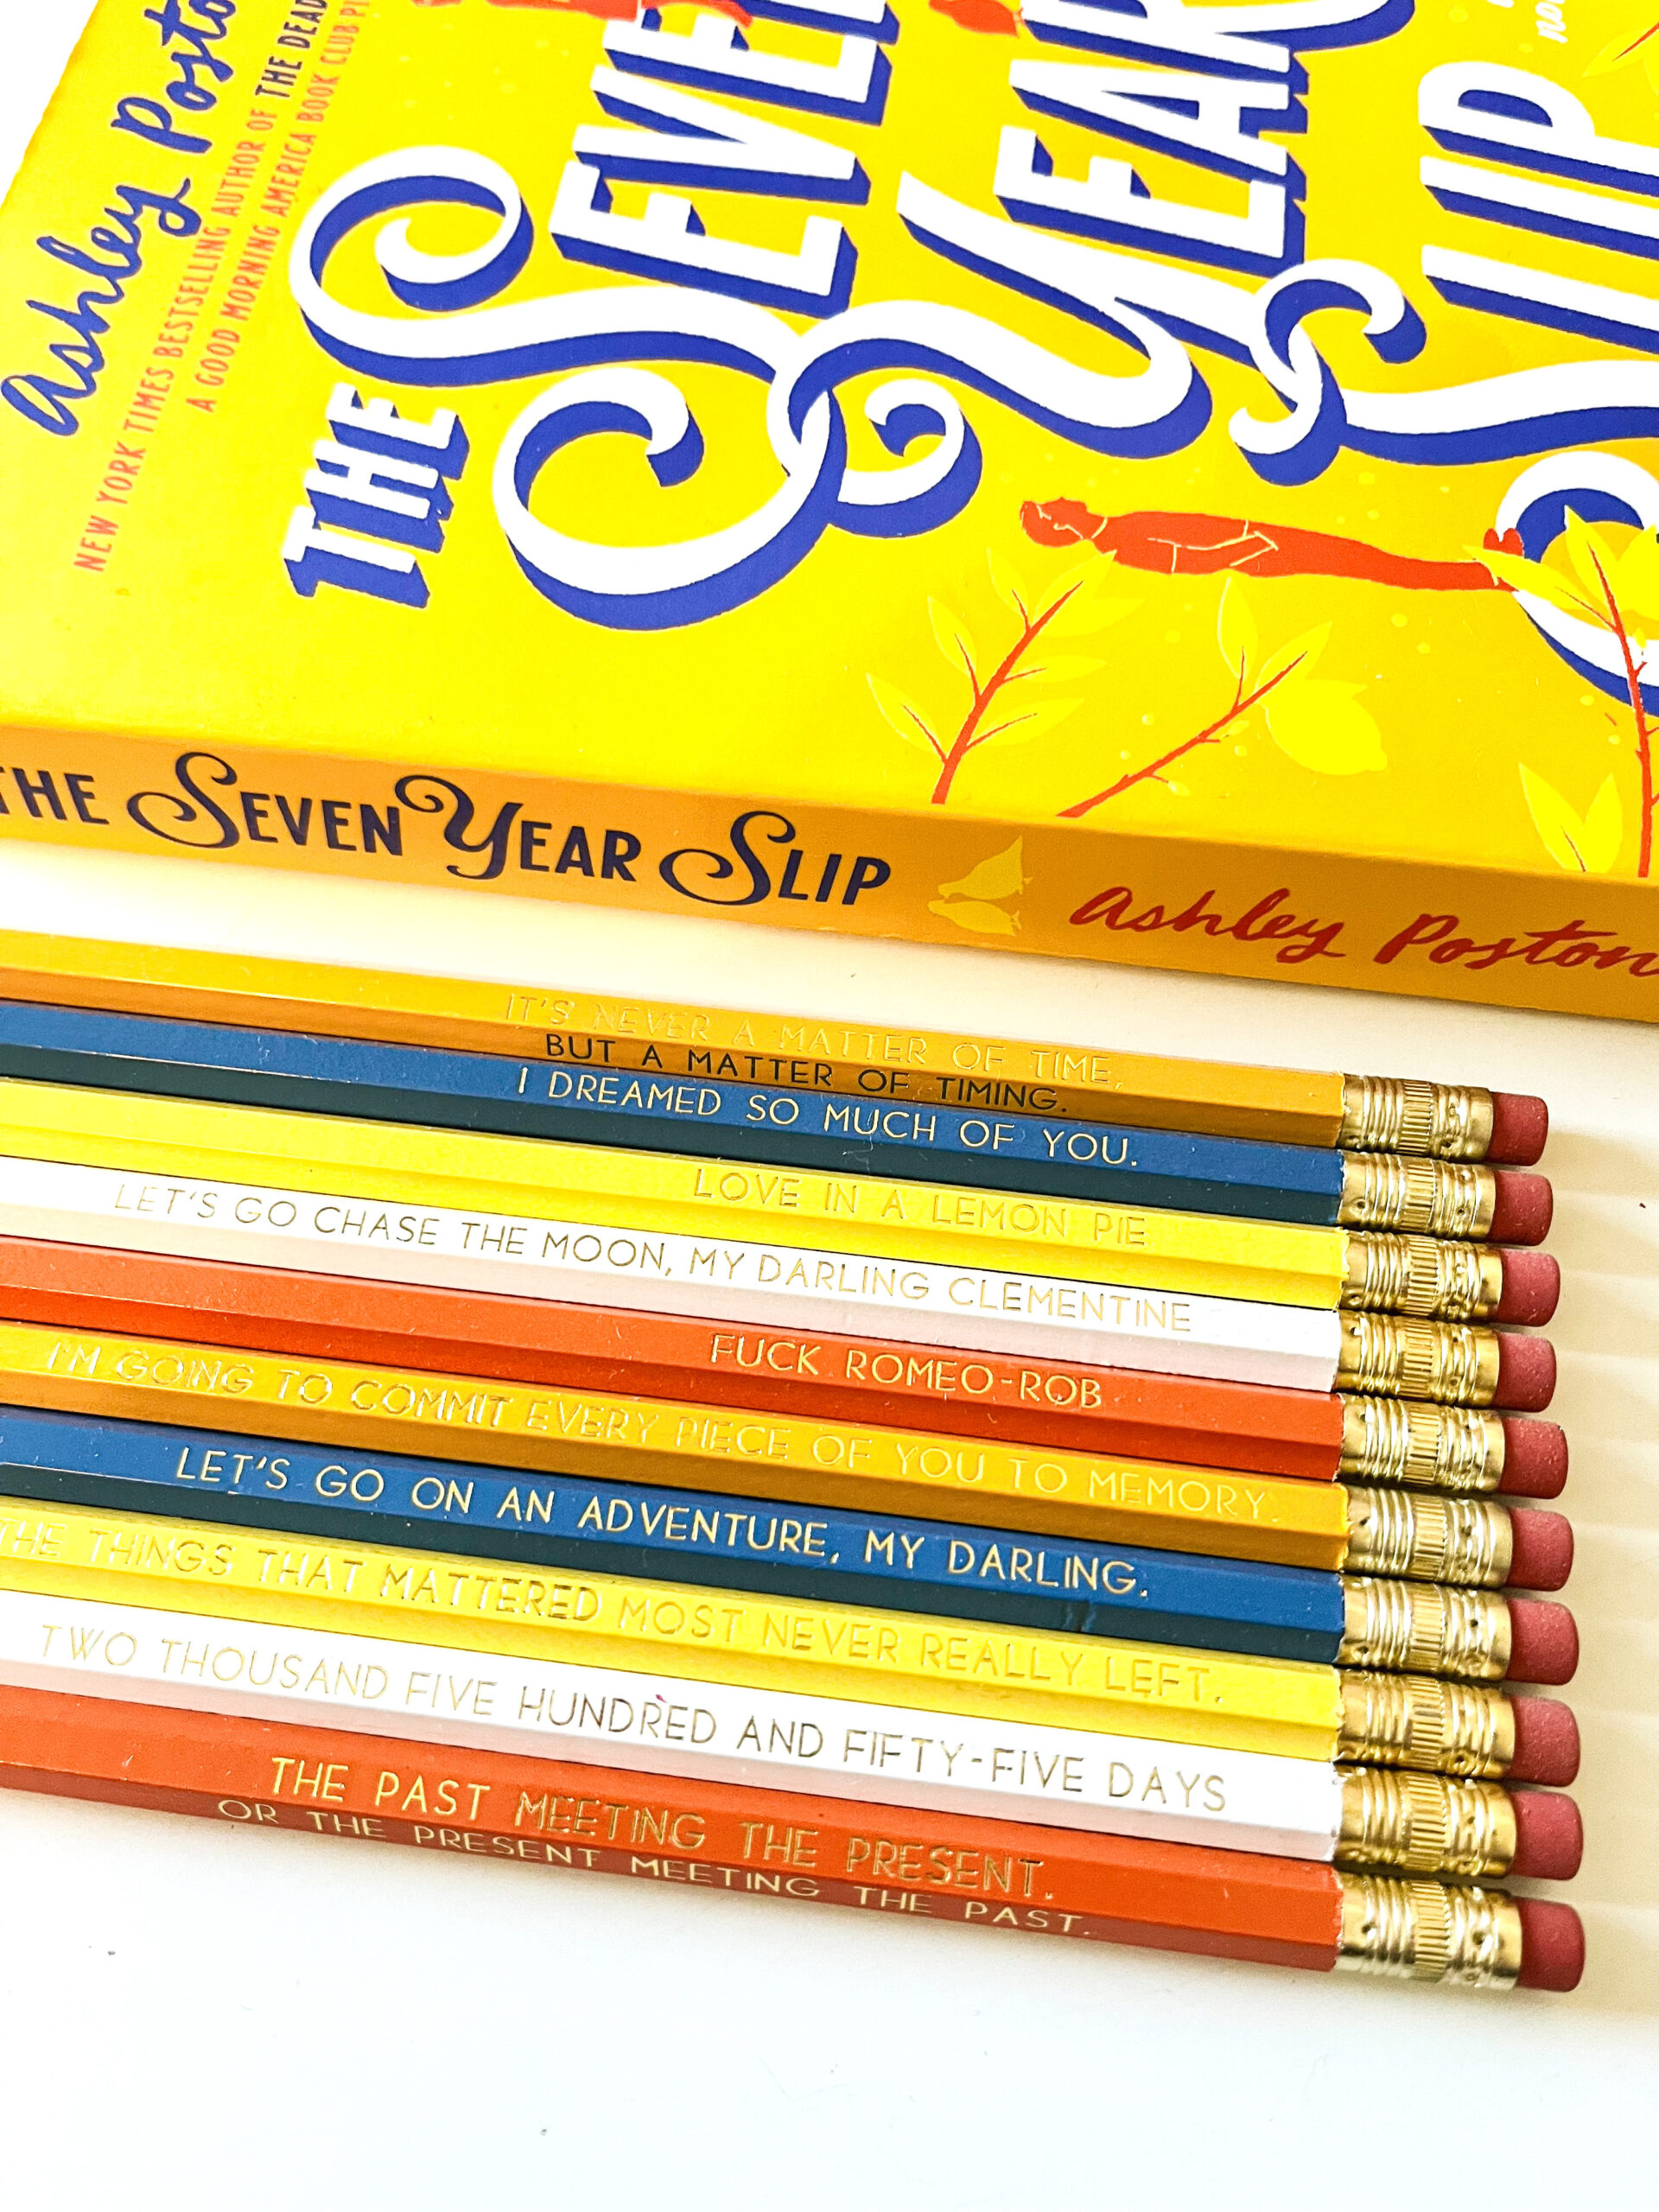 The Seven Year Slip - Longhand Pencils